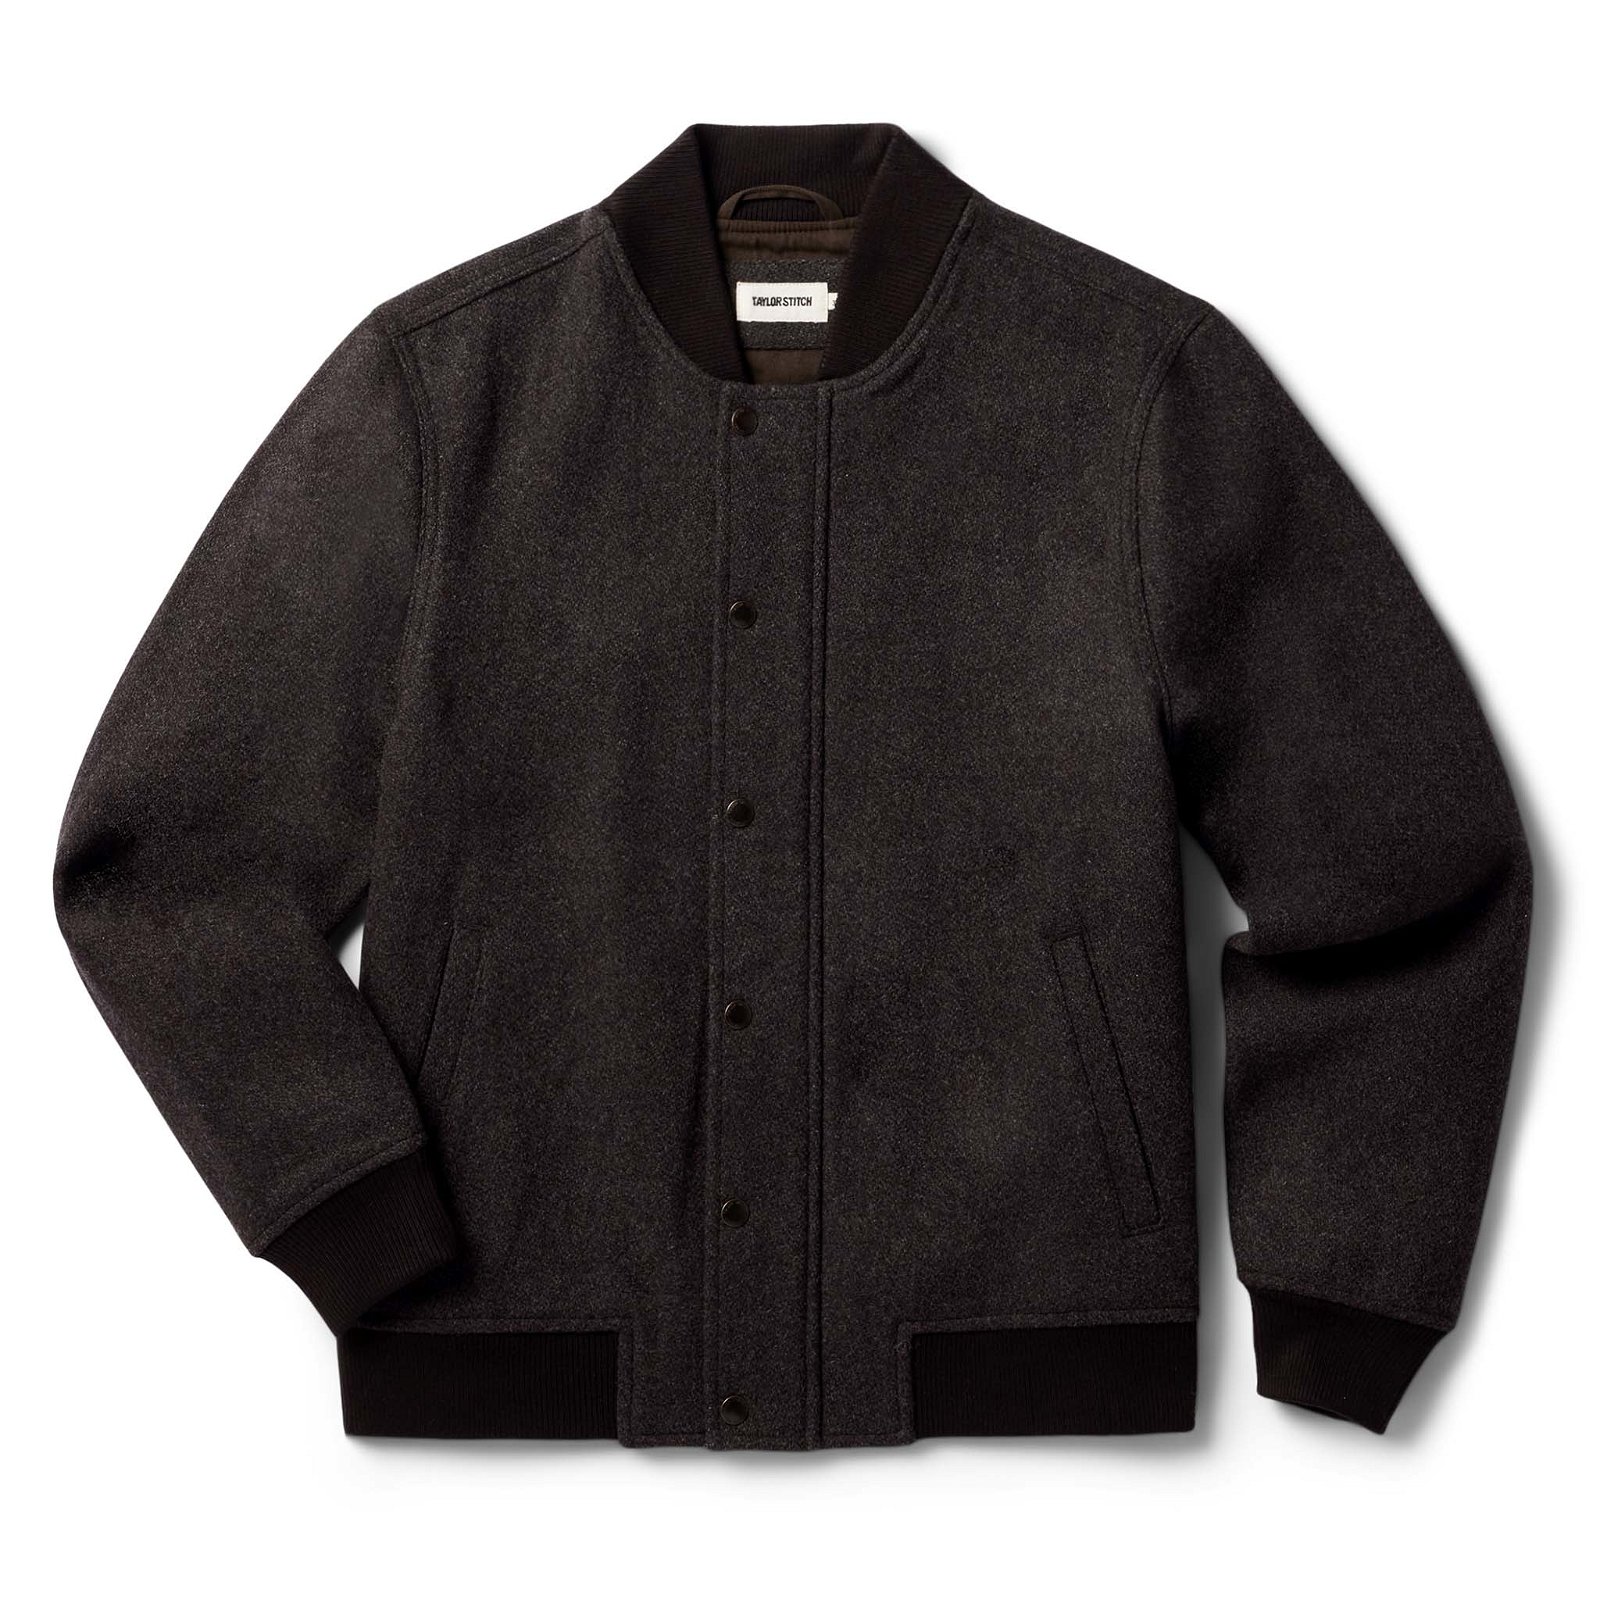 Image of The Bomber Jacket in Espresso Marl Wool